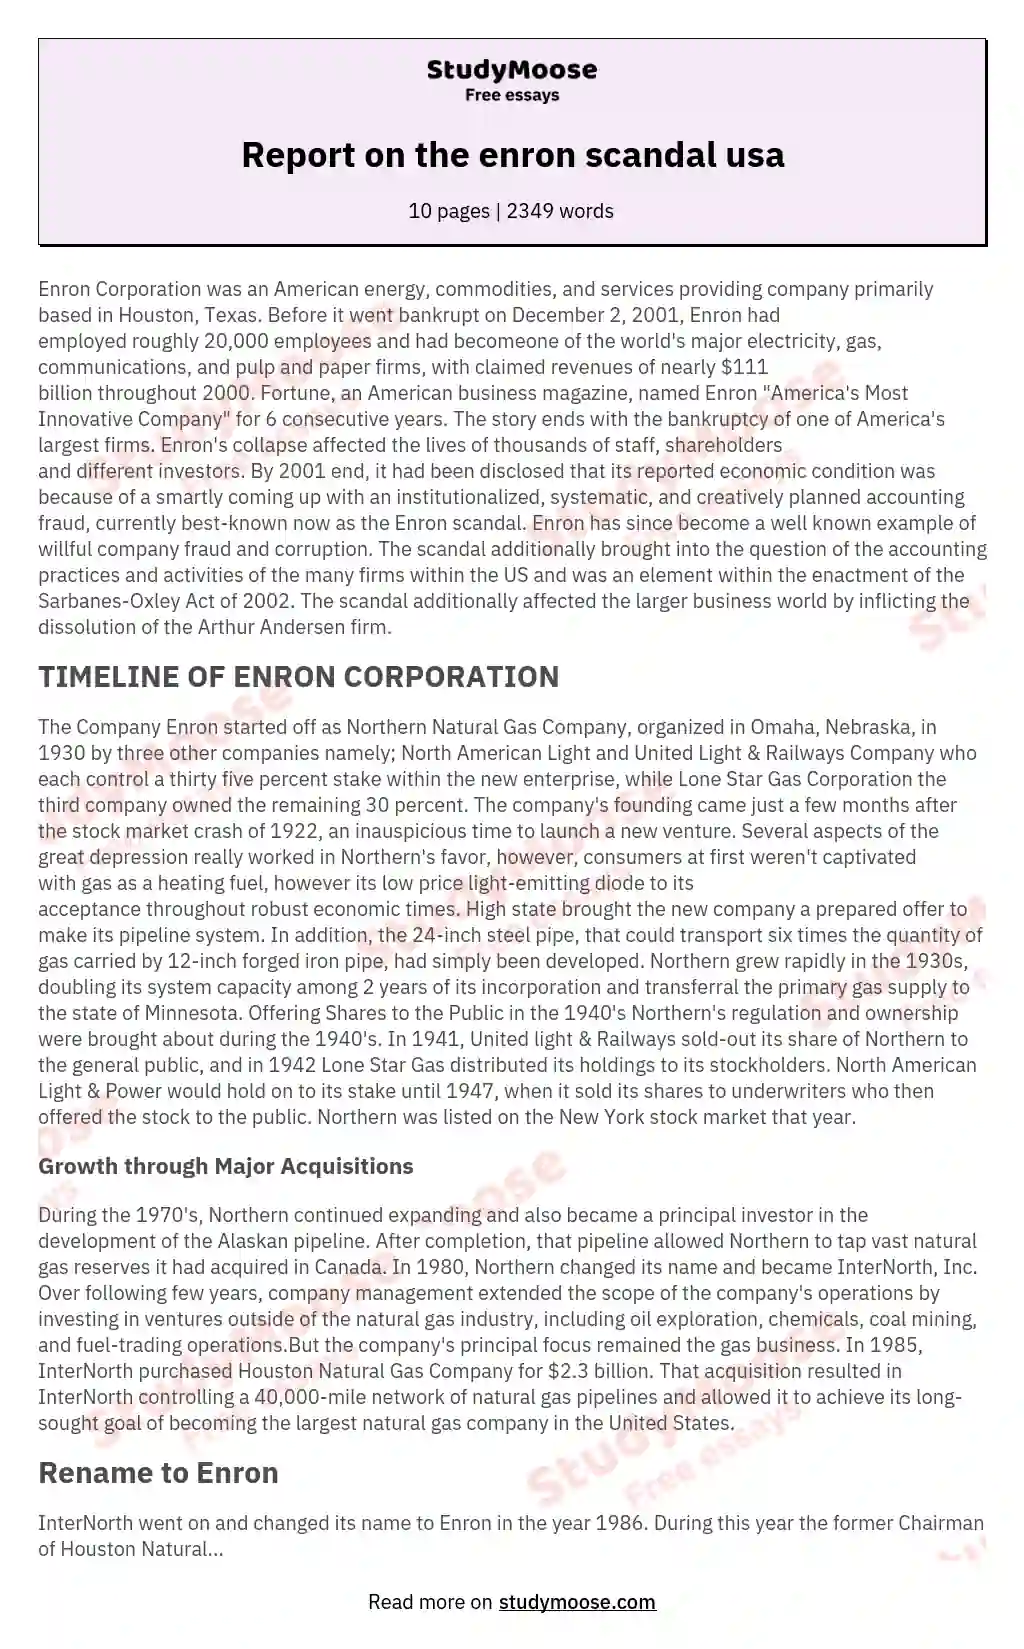 Report on the enron scandal usa essay